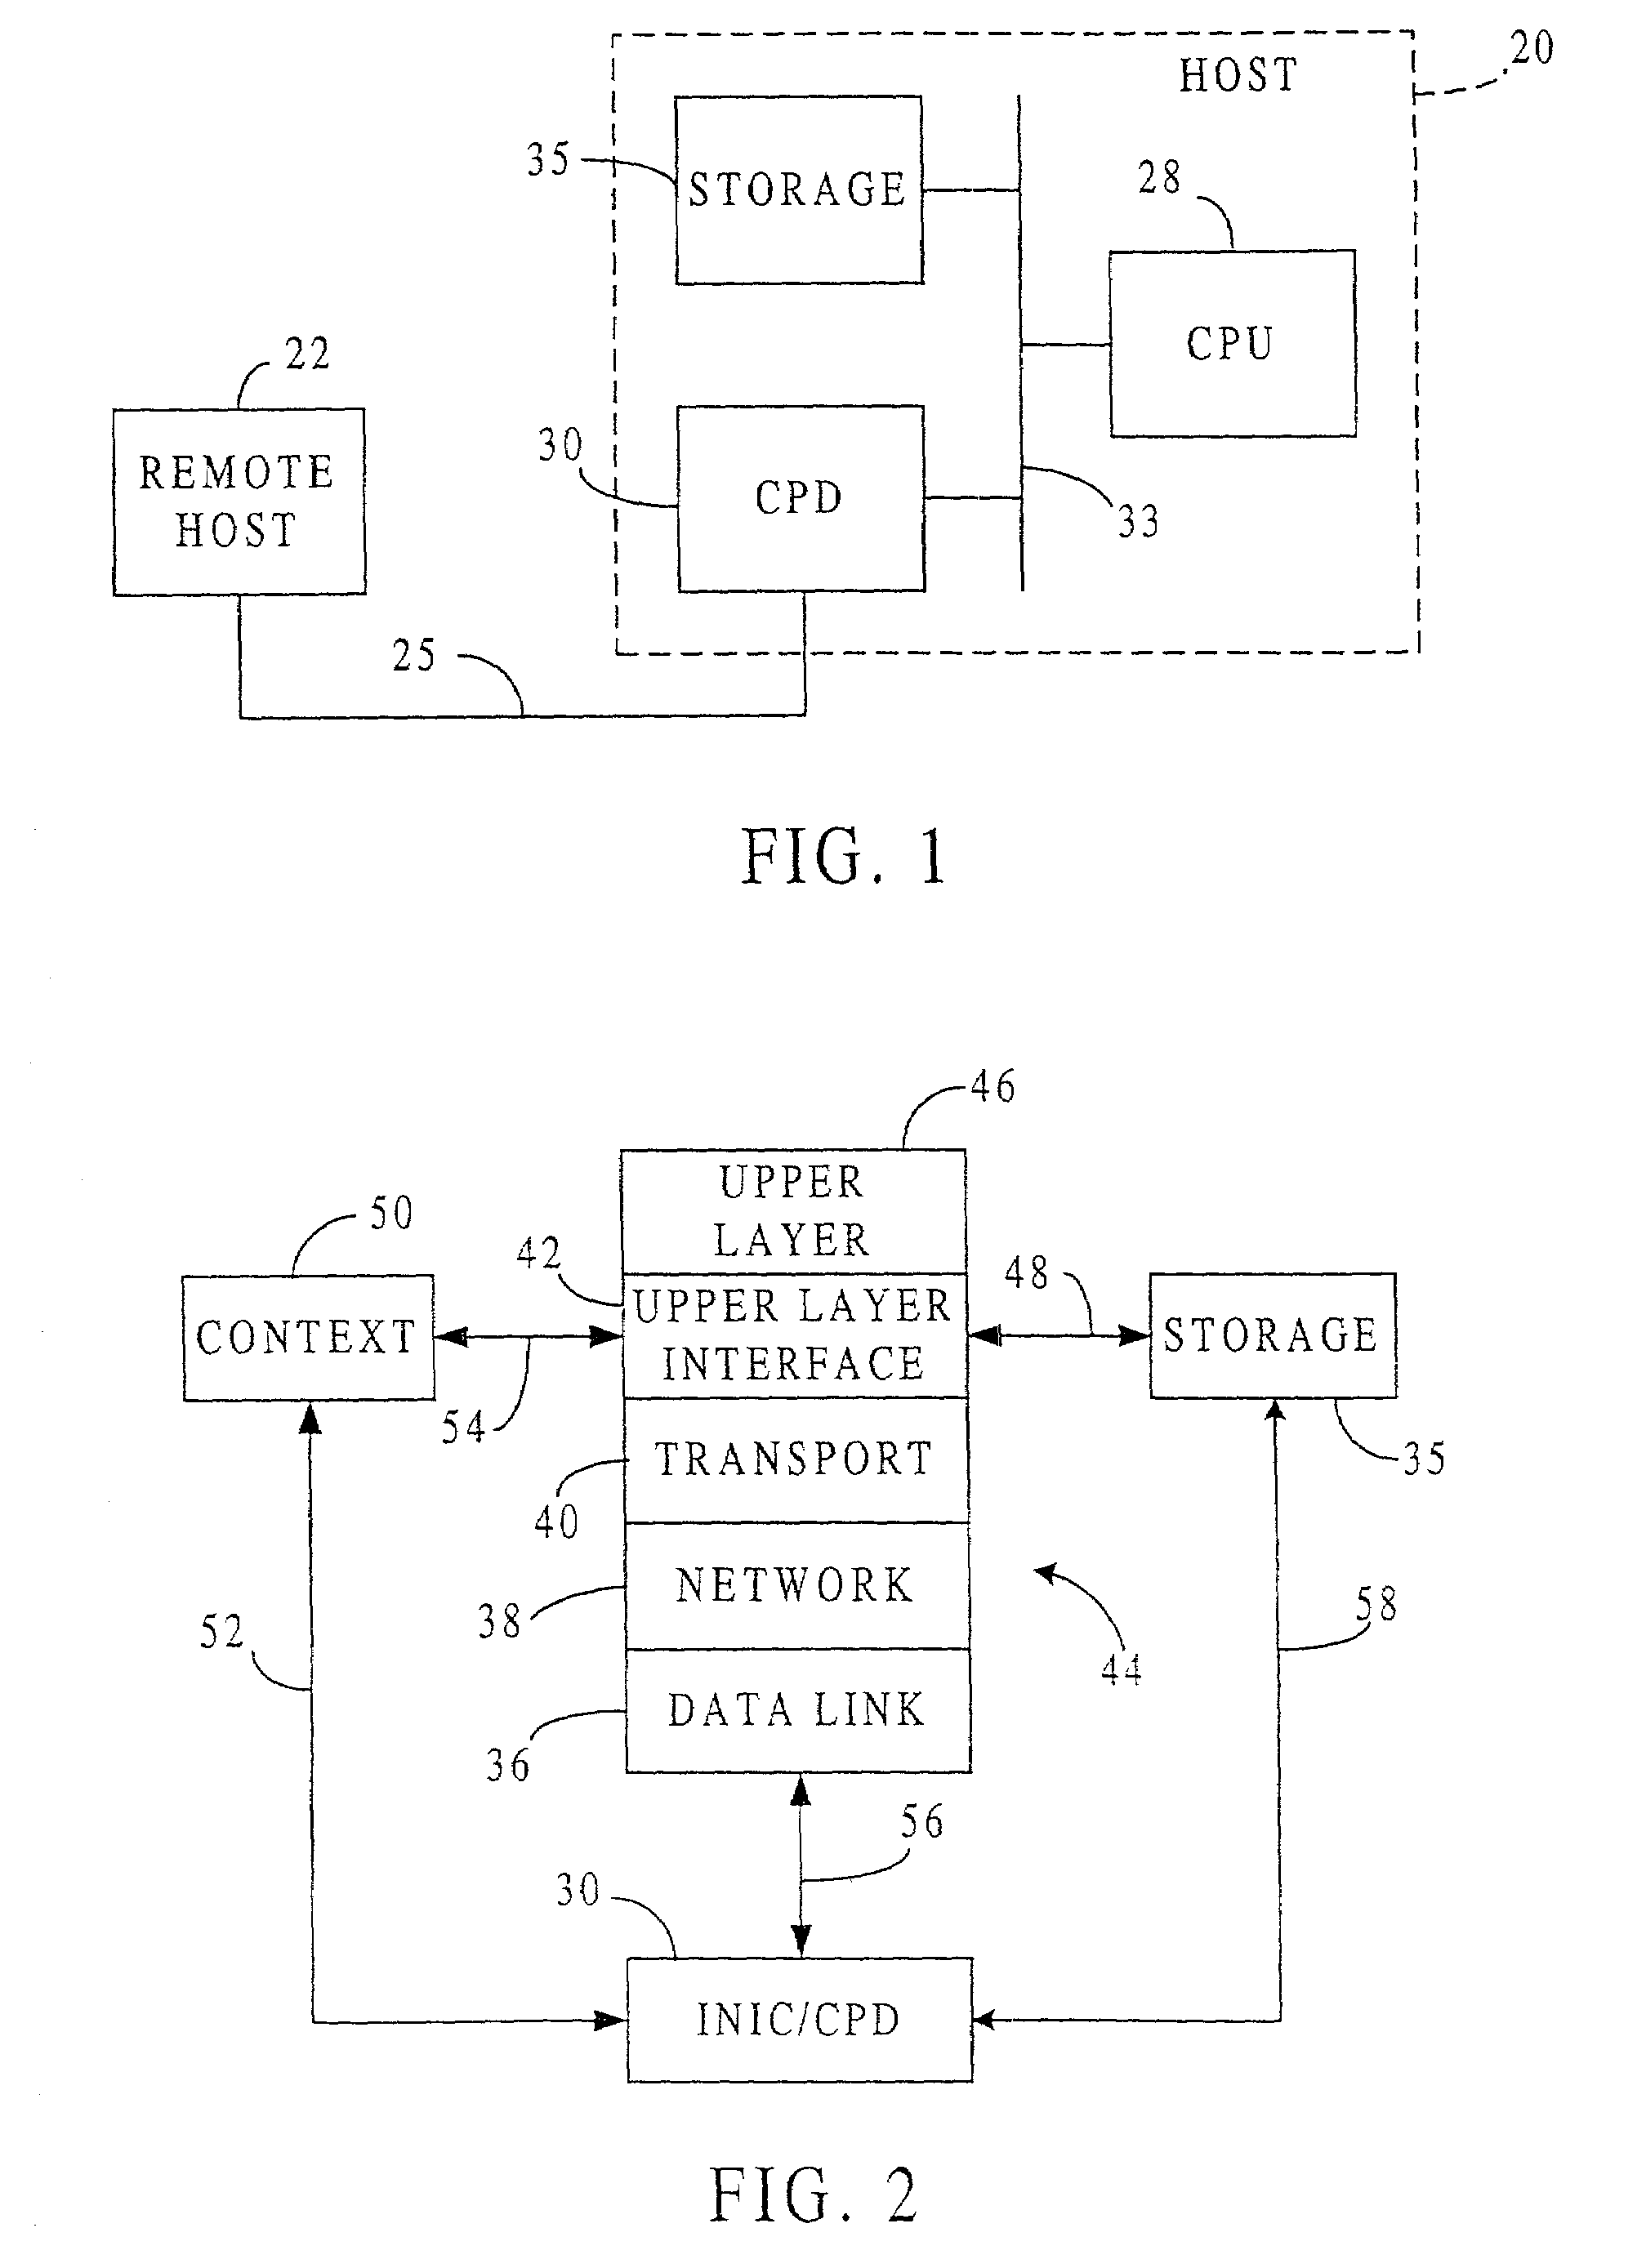 Fast-path processing for receiving data on TCP connection offload devices